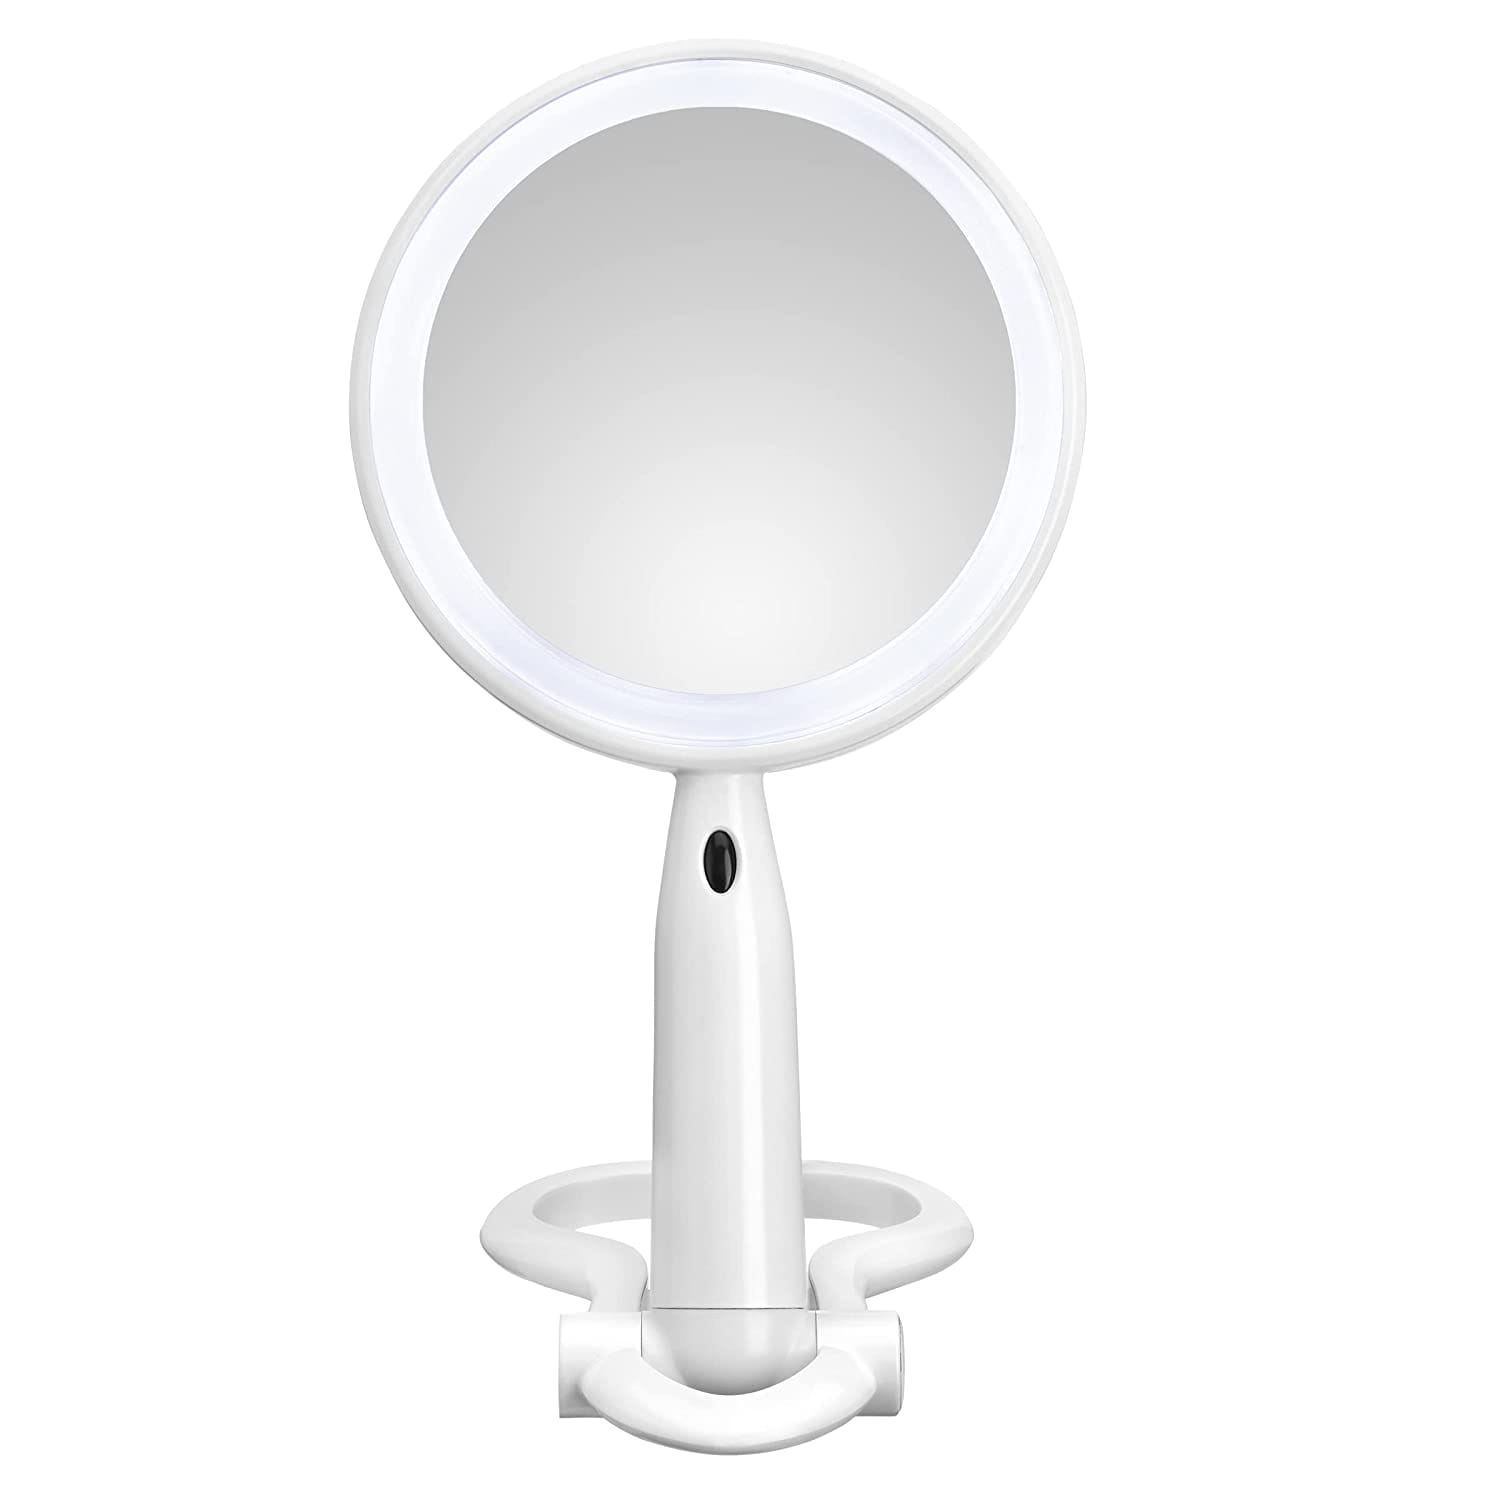 Conair Plastic Double-Sided Lighted Makeup Mirror - Lighted Vanity Makeup Mirror with LED Lights; 1x/3x magnification; White; compact - great for travel - BE52LED-2P